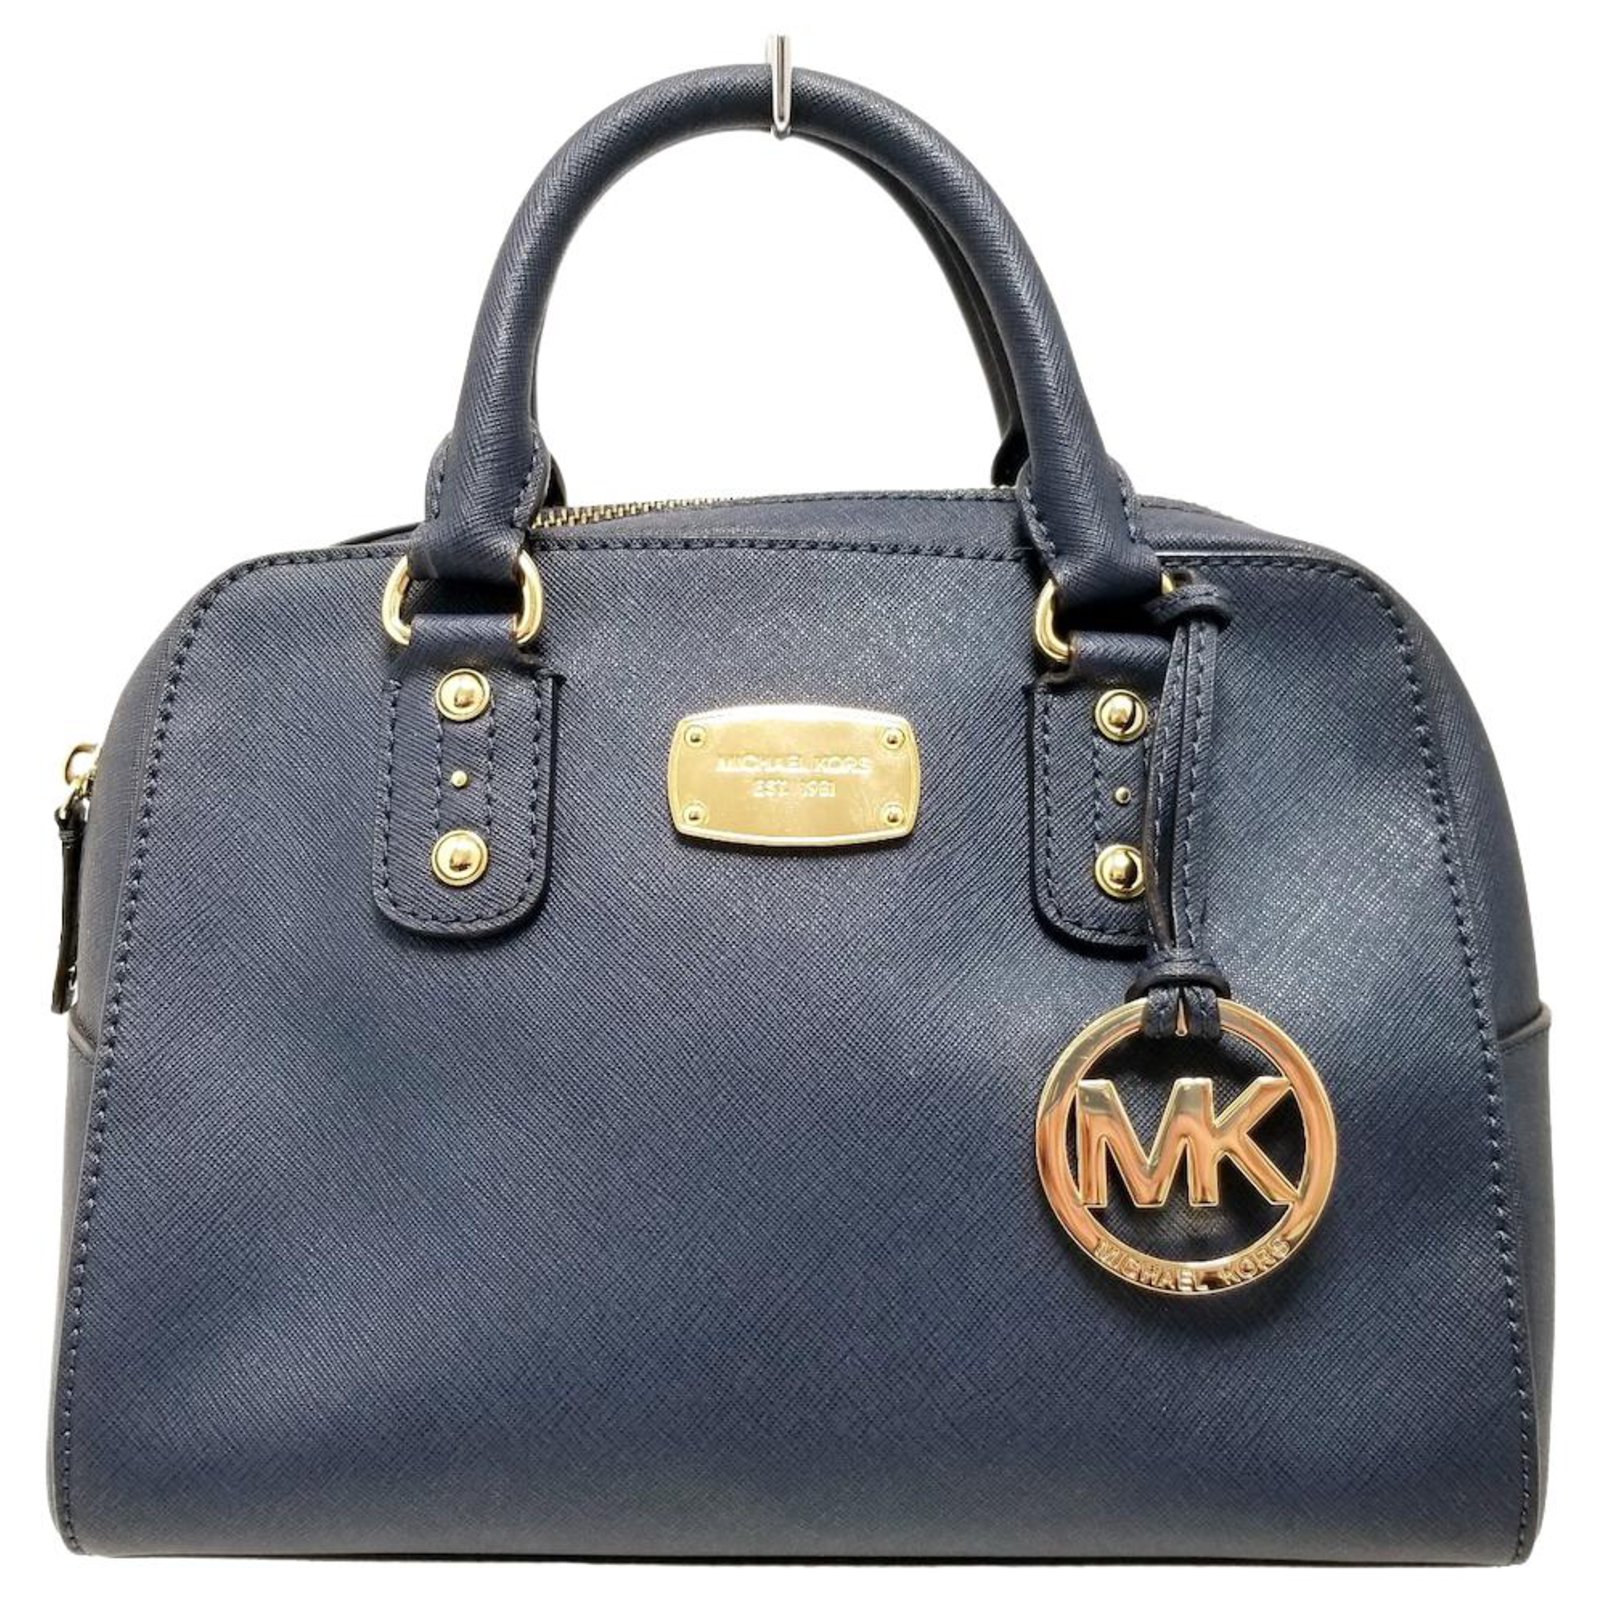 MICHAEL KORS #37255 Navy Blue Pebbled Leather Large Tote Bag – ALL